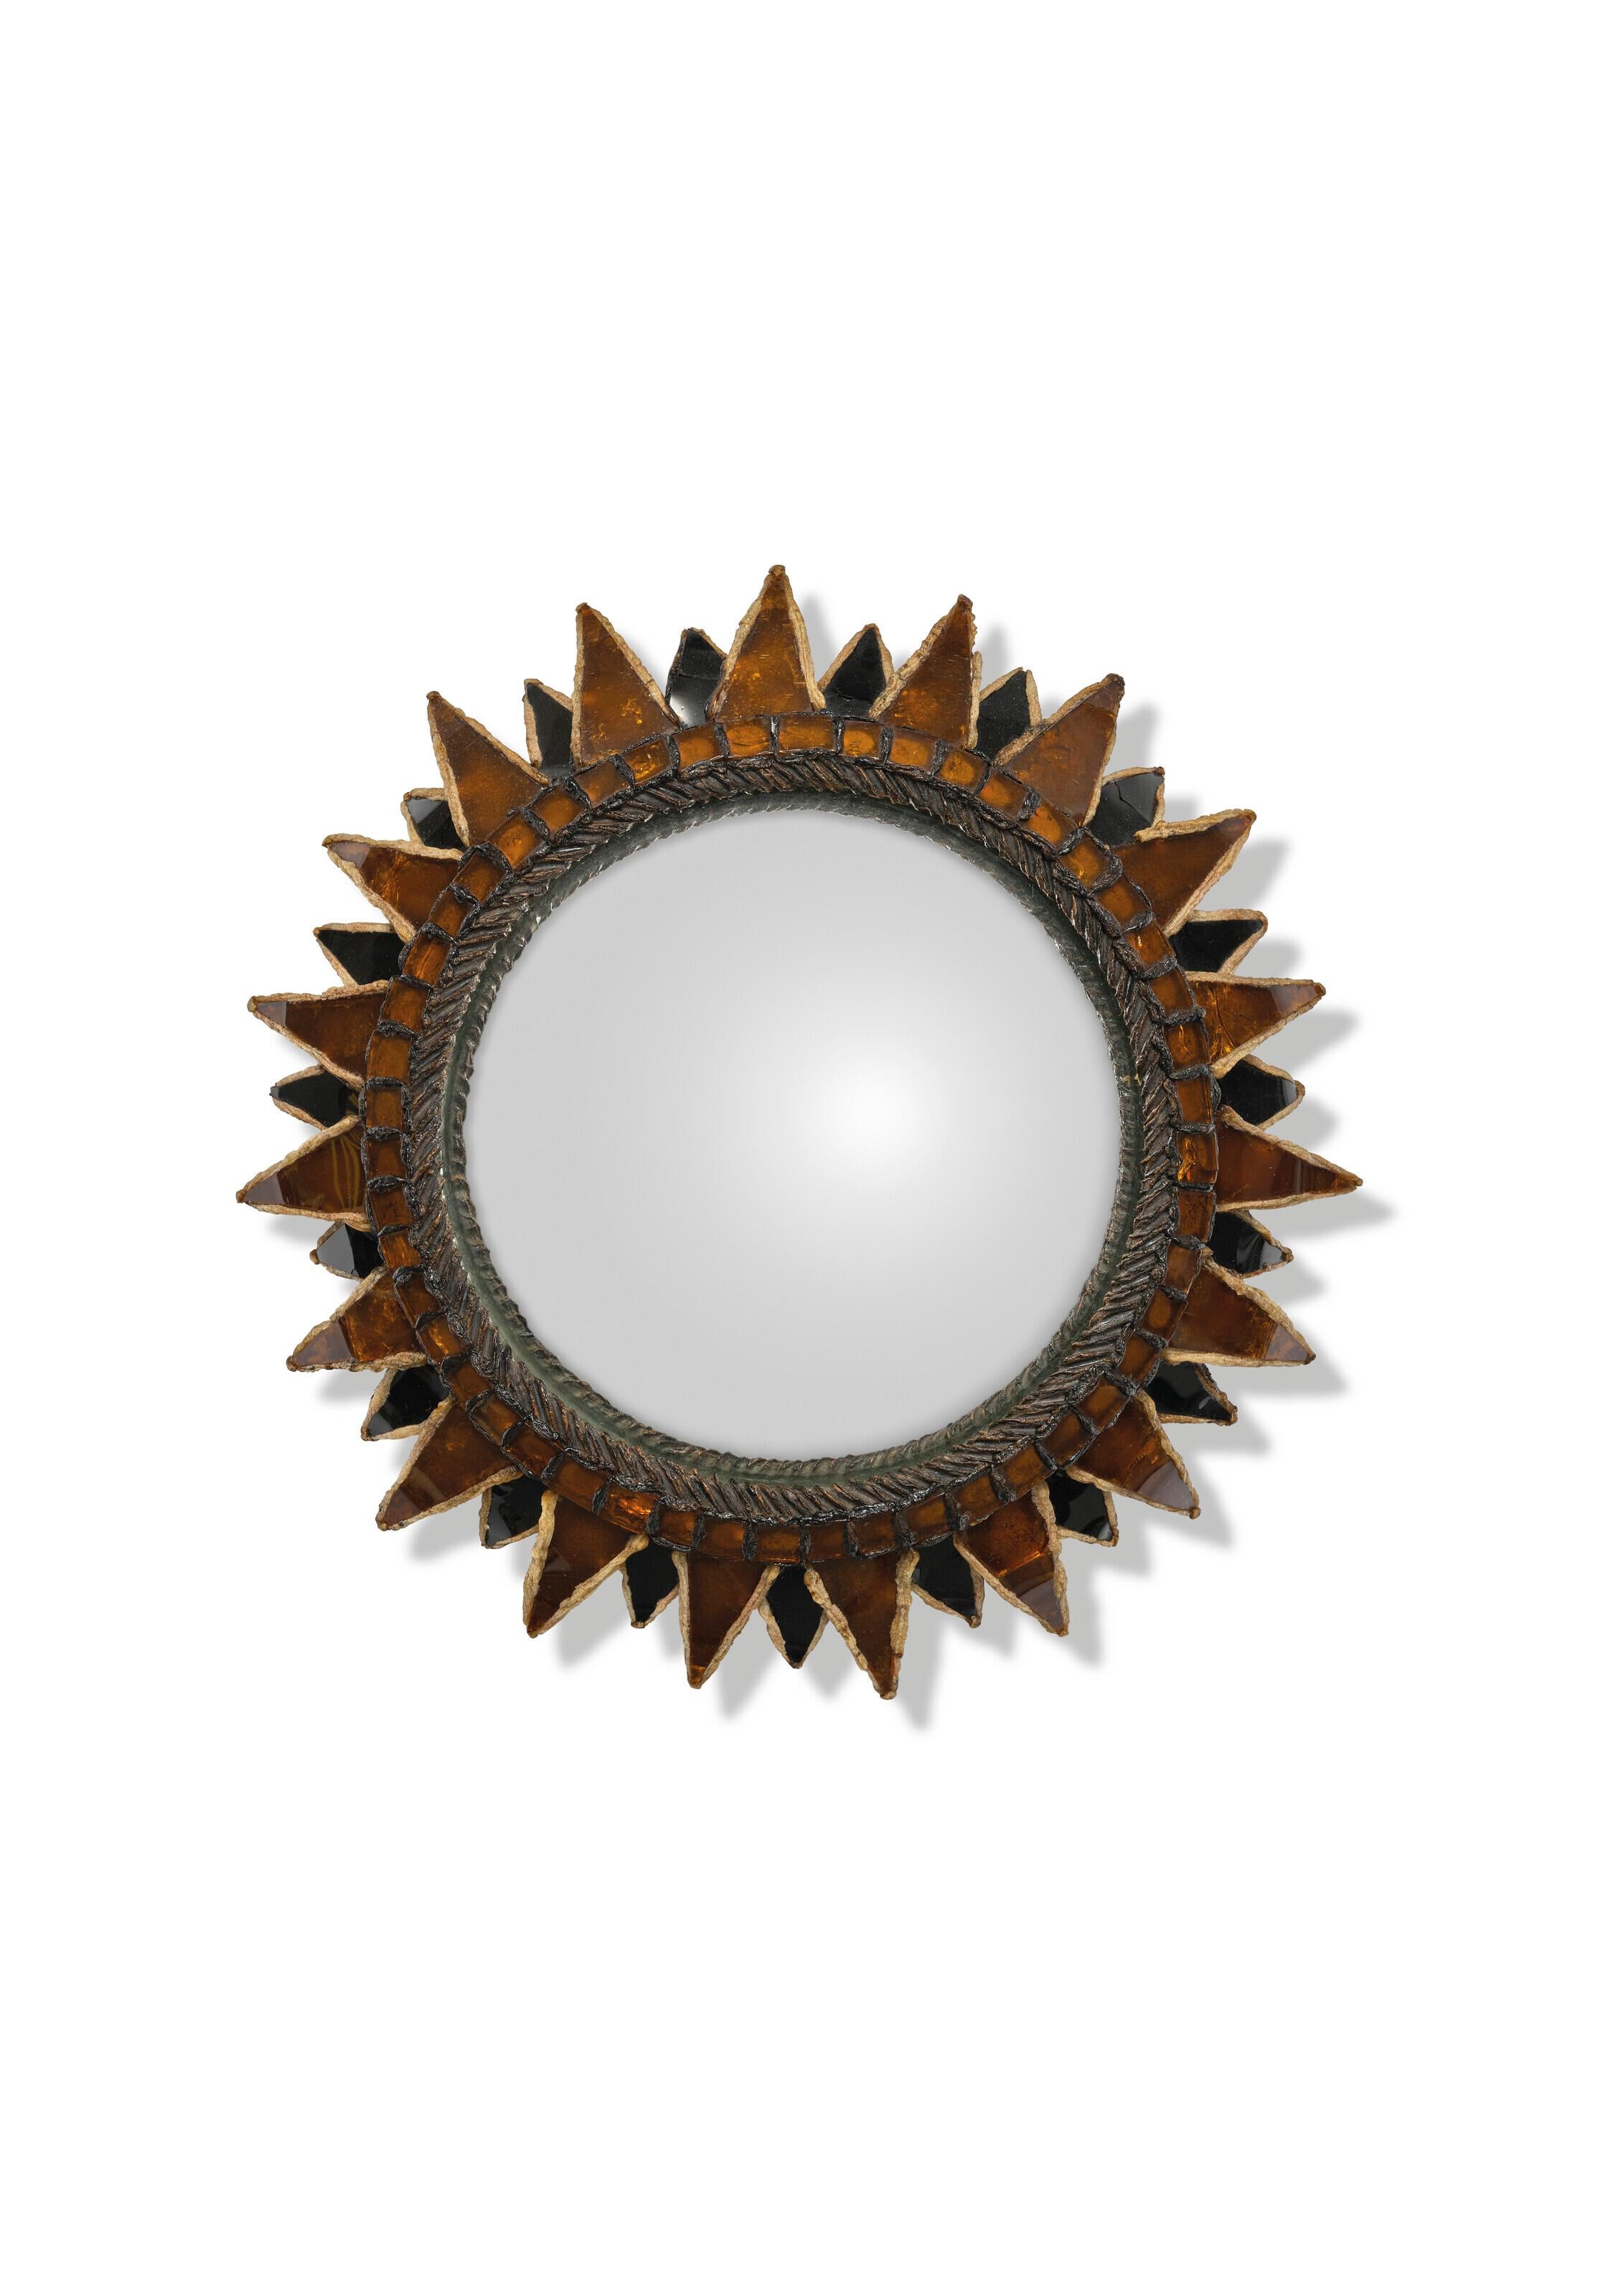 French '60s 'Soleil à pointes n. 2' Mirror by Line Vautrin For Sale